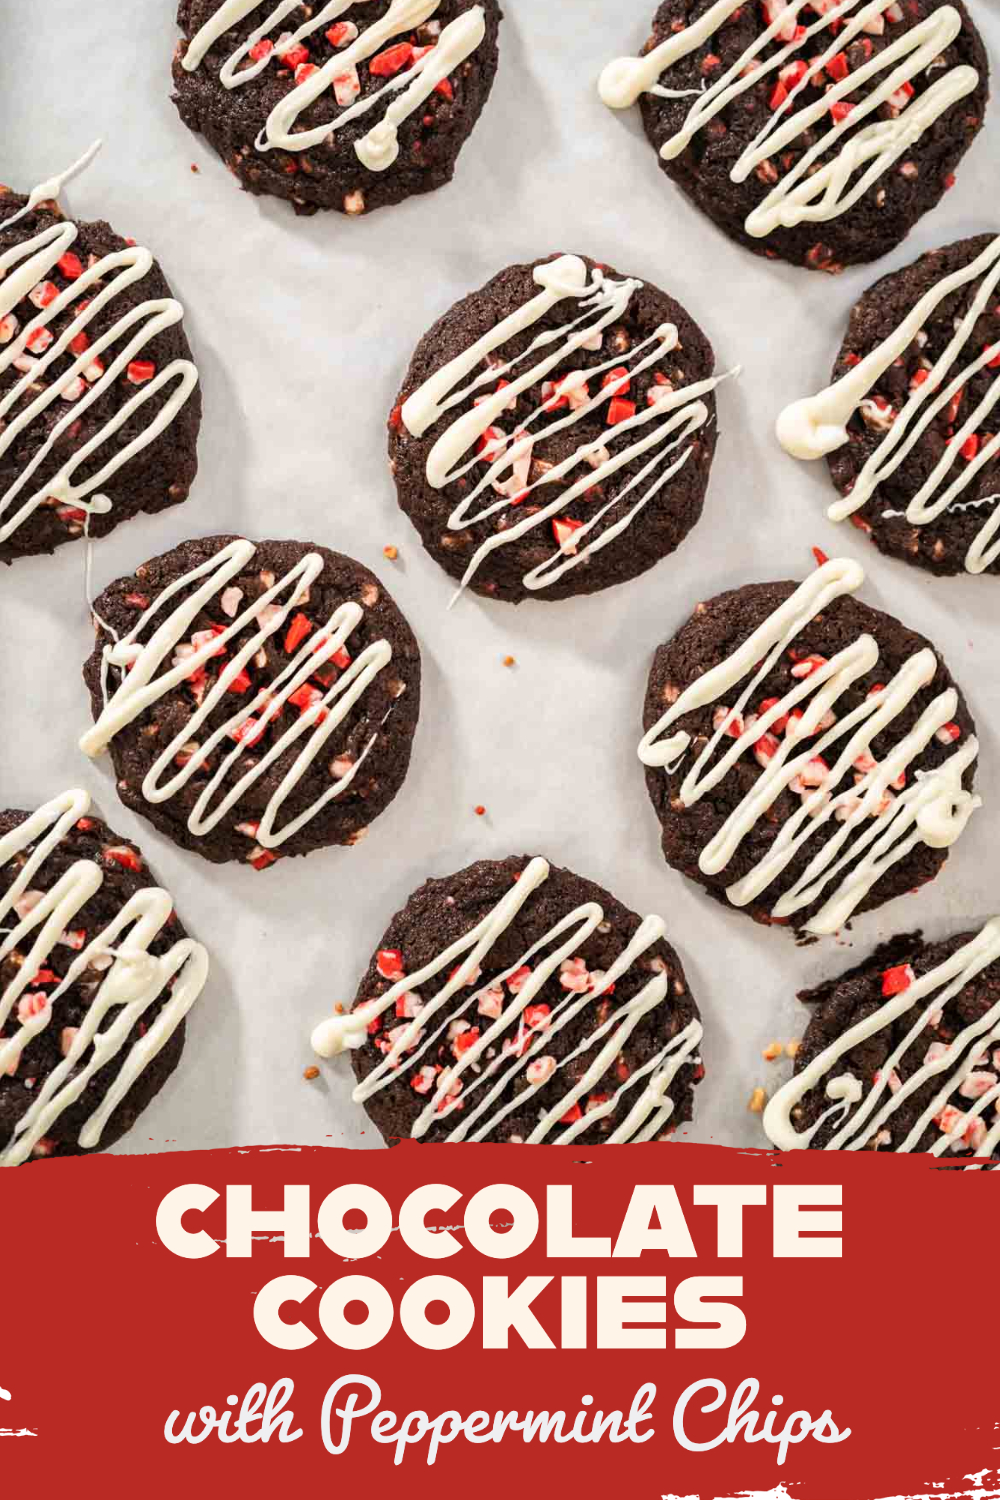 Chocolate Cookies with Peppermint Chips